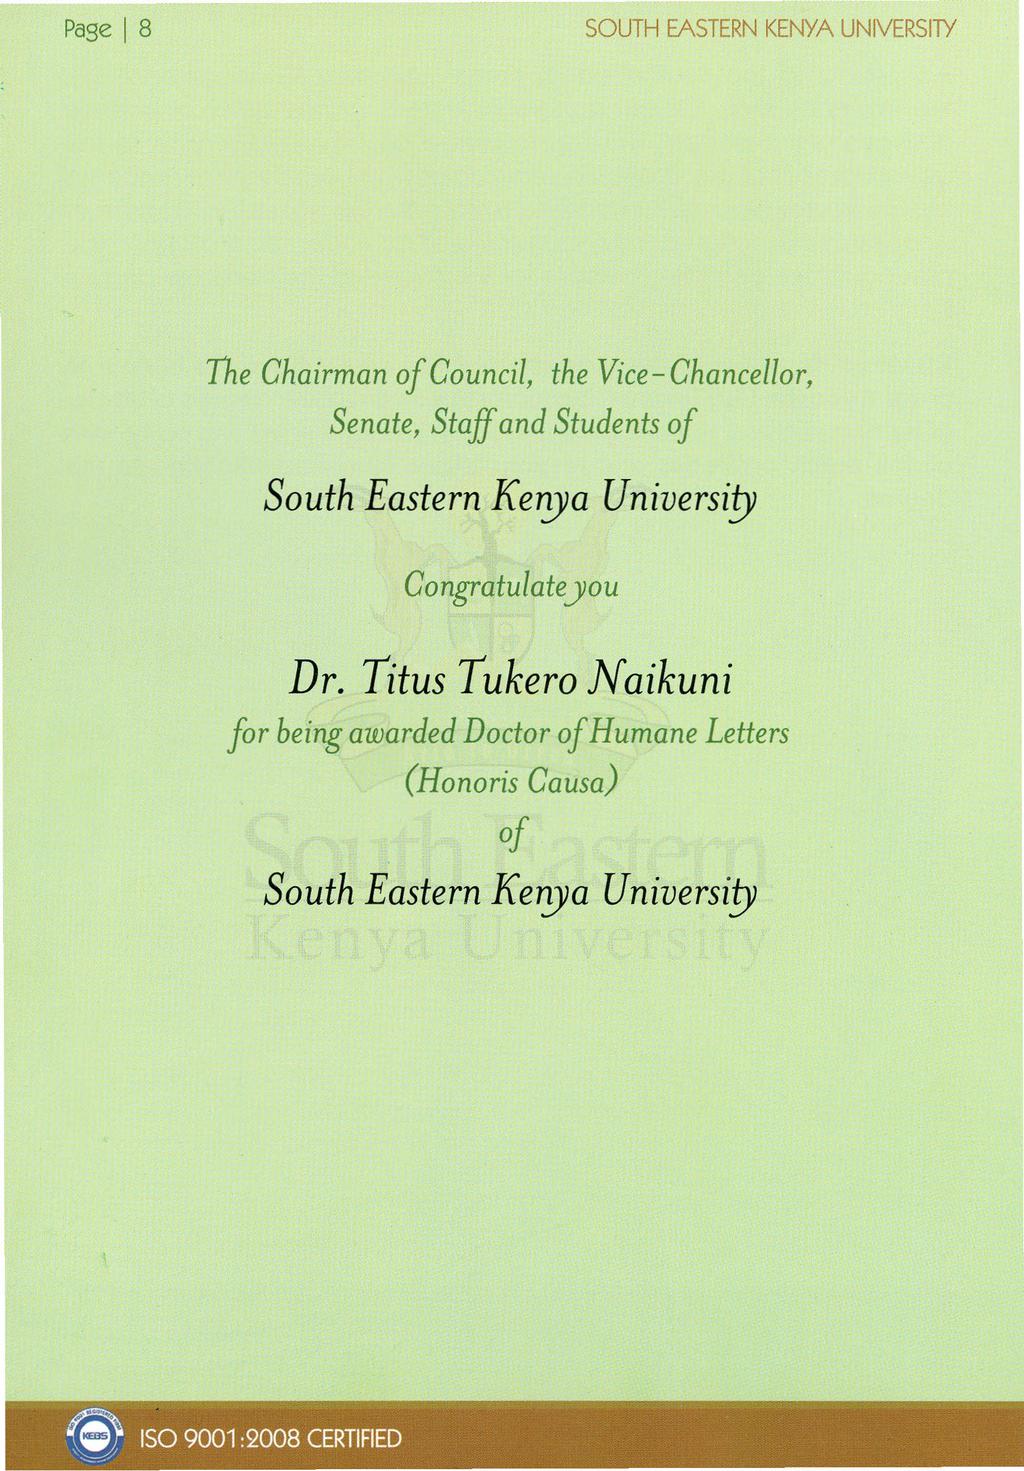 Page I8 SOUTH EASTERN KENYA UNIVERSITY The Chairman of Council, the Vice-Chancellor, Senate, Staff and Students of South Eastern Ke1!Ya Universi!